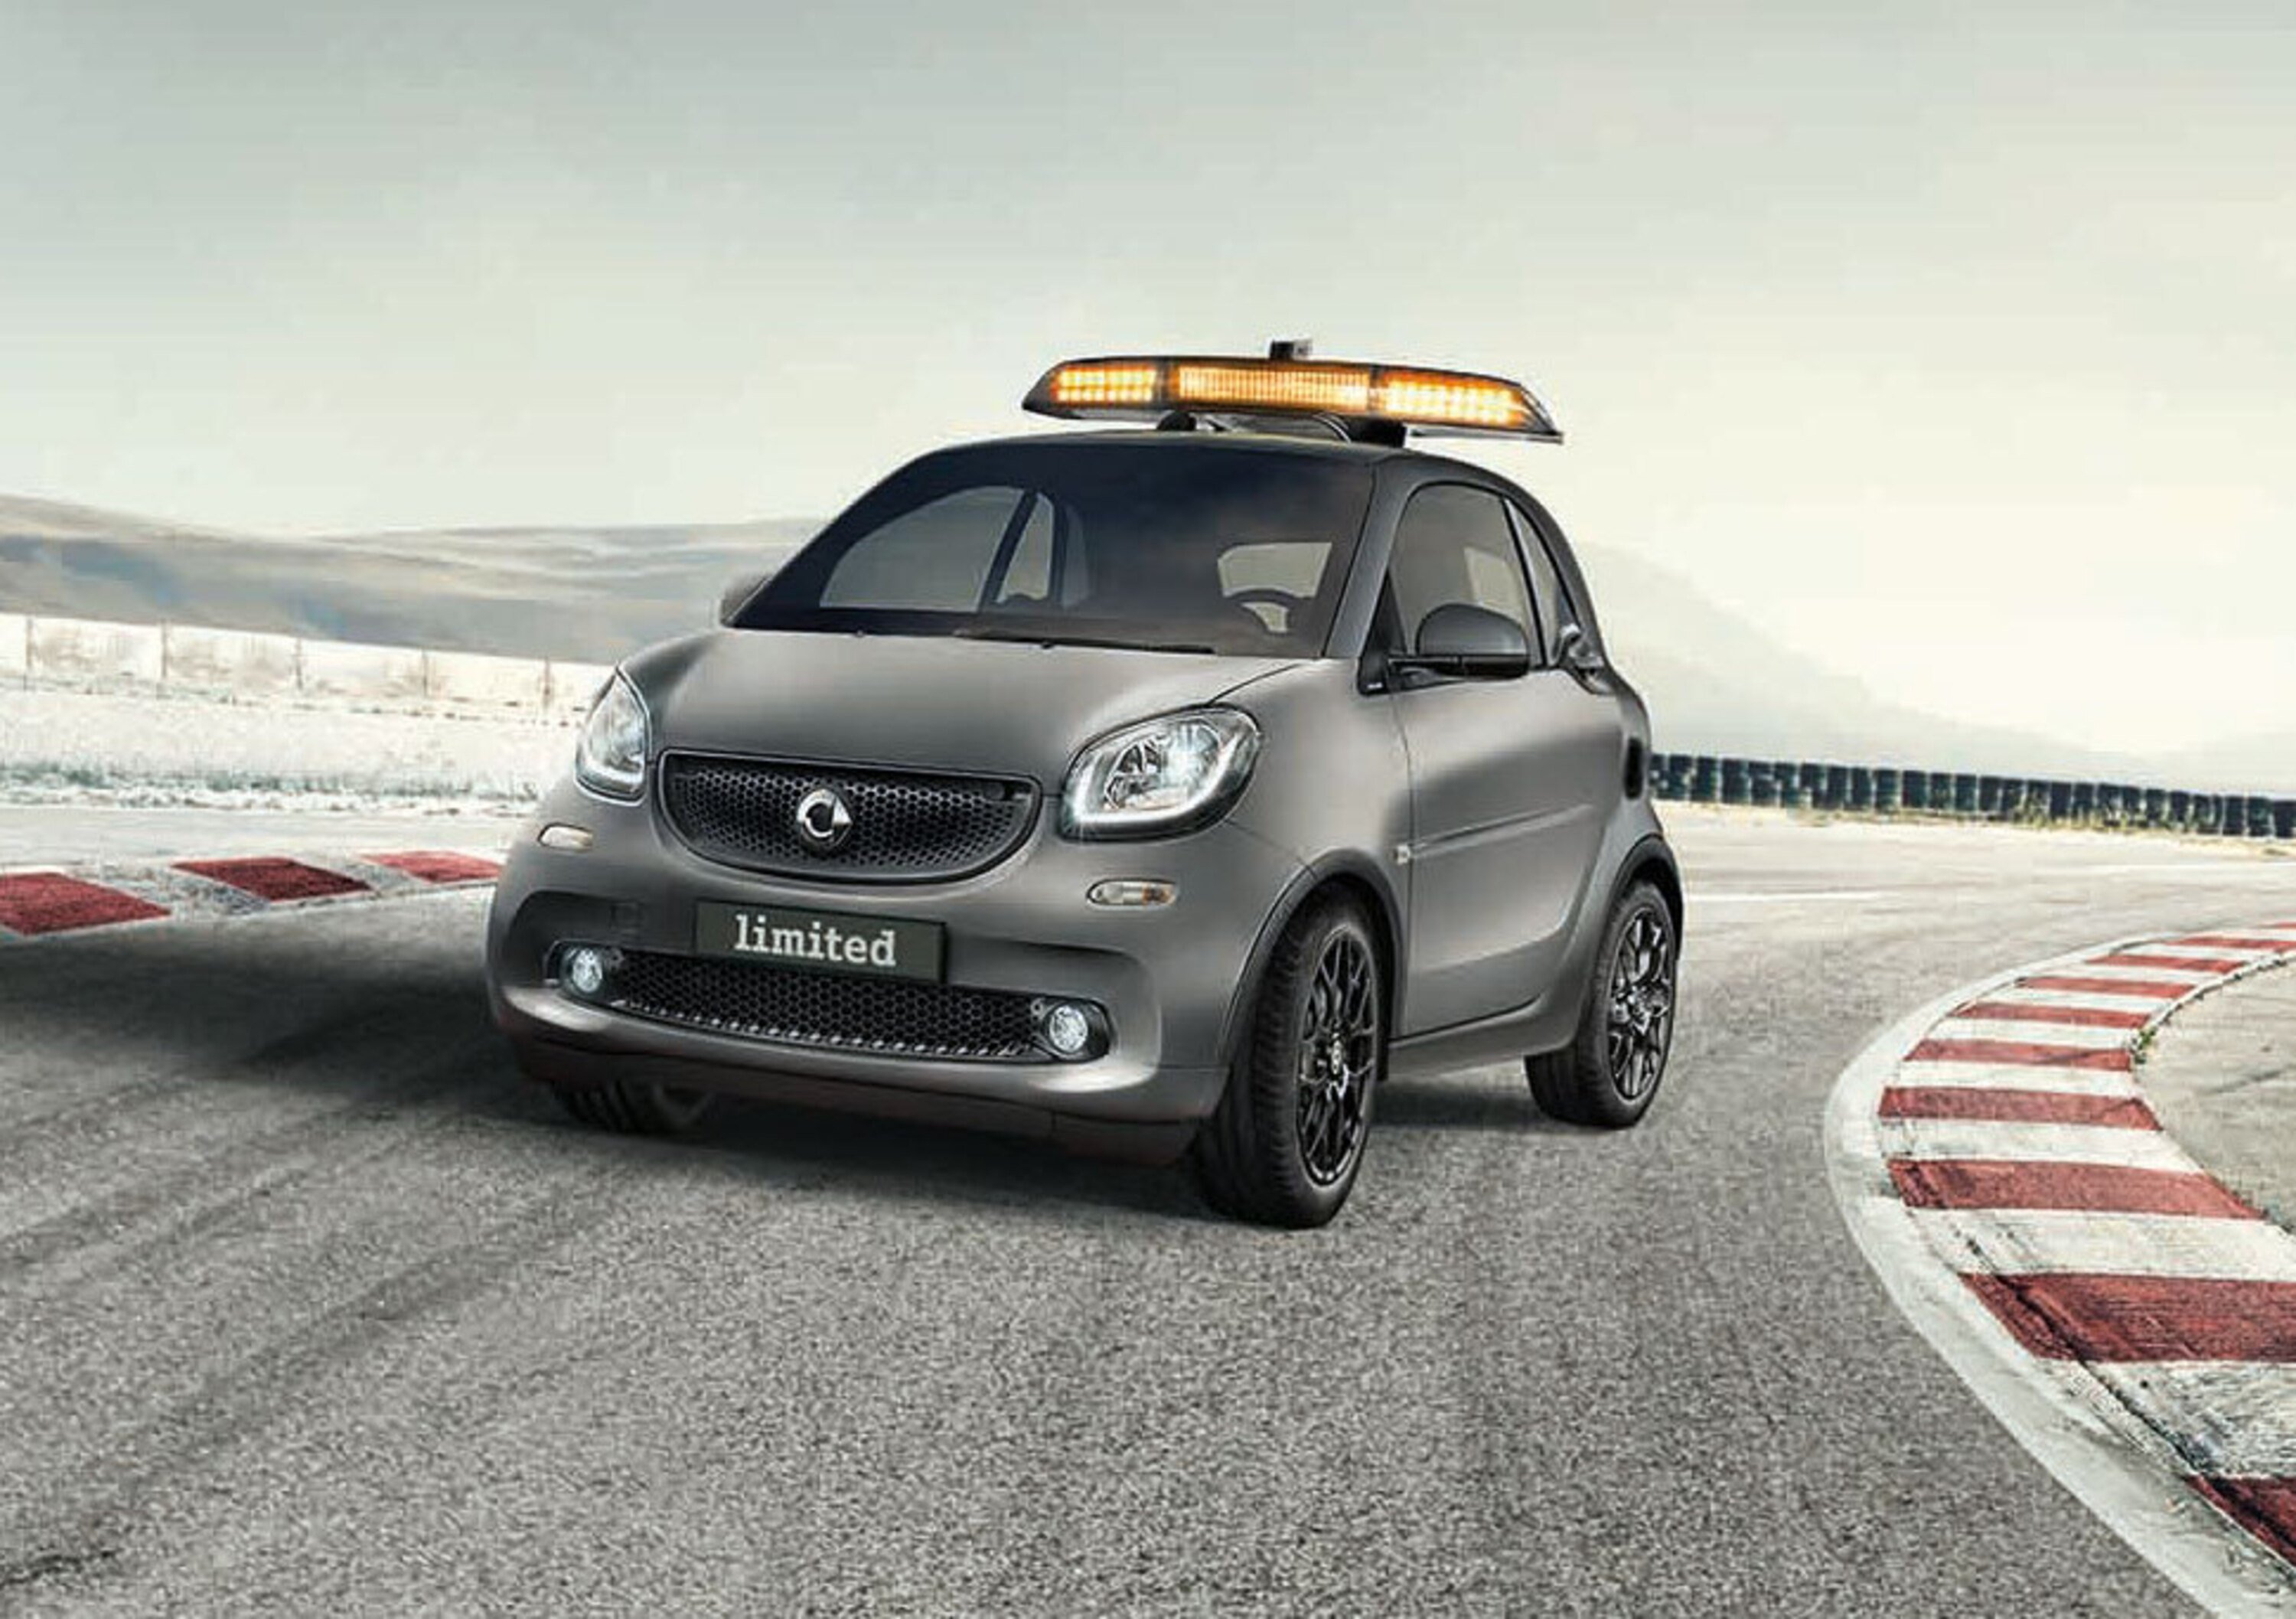 Smart limited #1 e limited #2, le prime due fortwo speciali